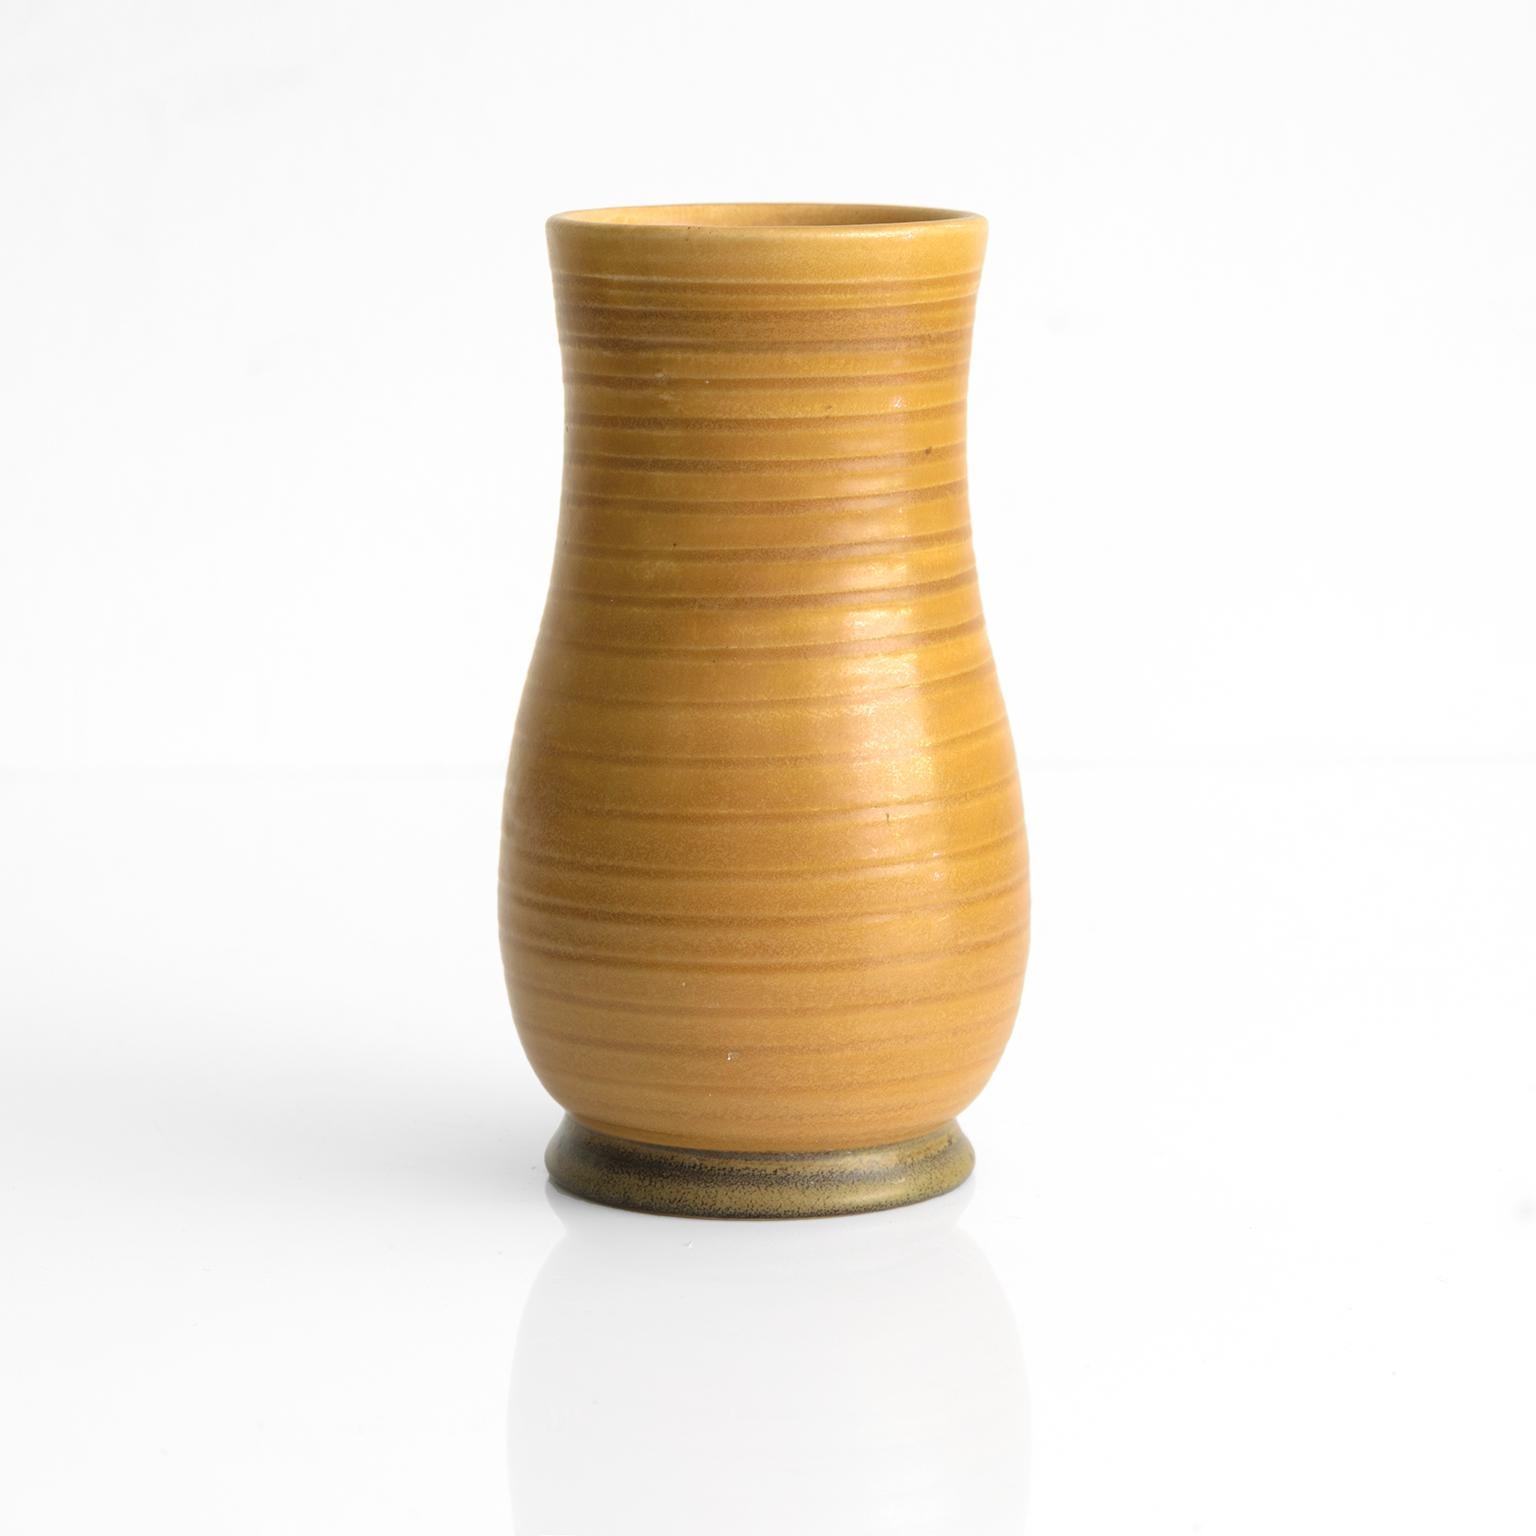 Swedish artist and master ceramicist Ewald Dahlskog low relief vase with a deep golden glaze. The gentle spiral line follows the vase’s form leading from the gently slopped foot. Hand made by Dahlskog at Bo Fajans, Pottery, late 1930’s Sweden.